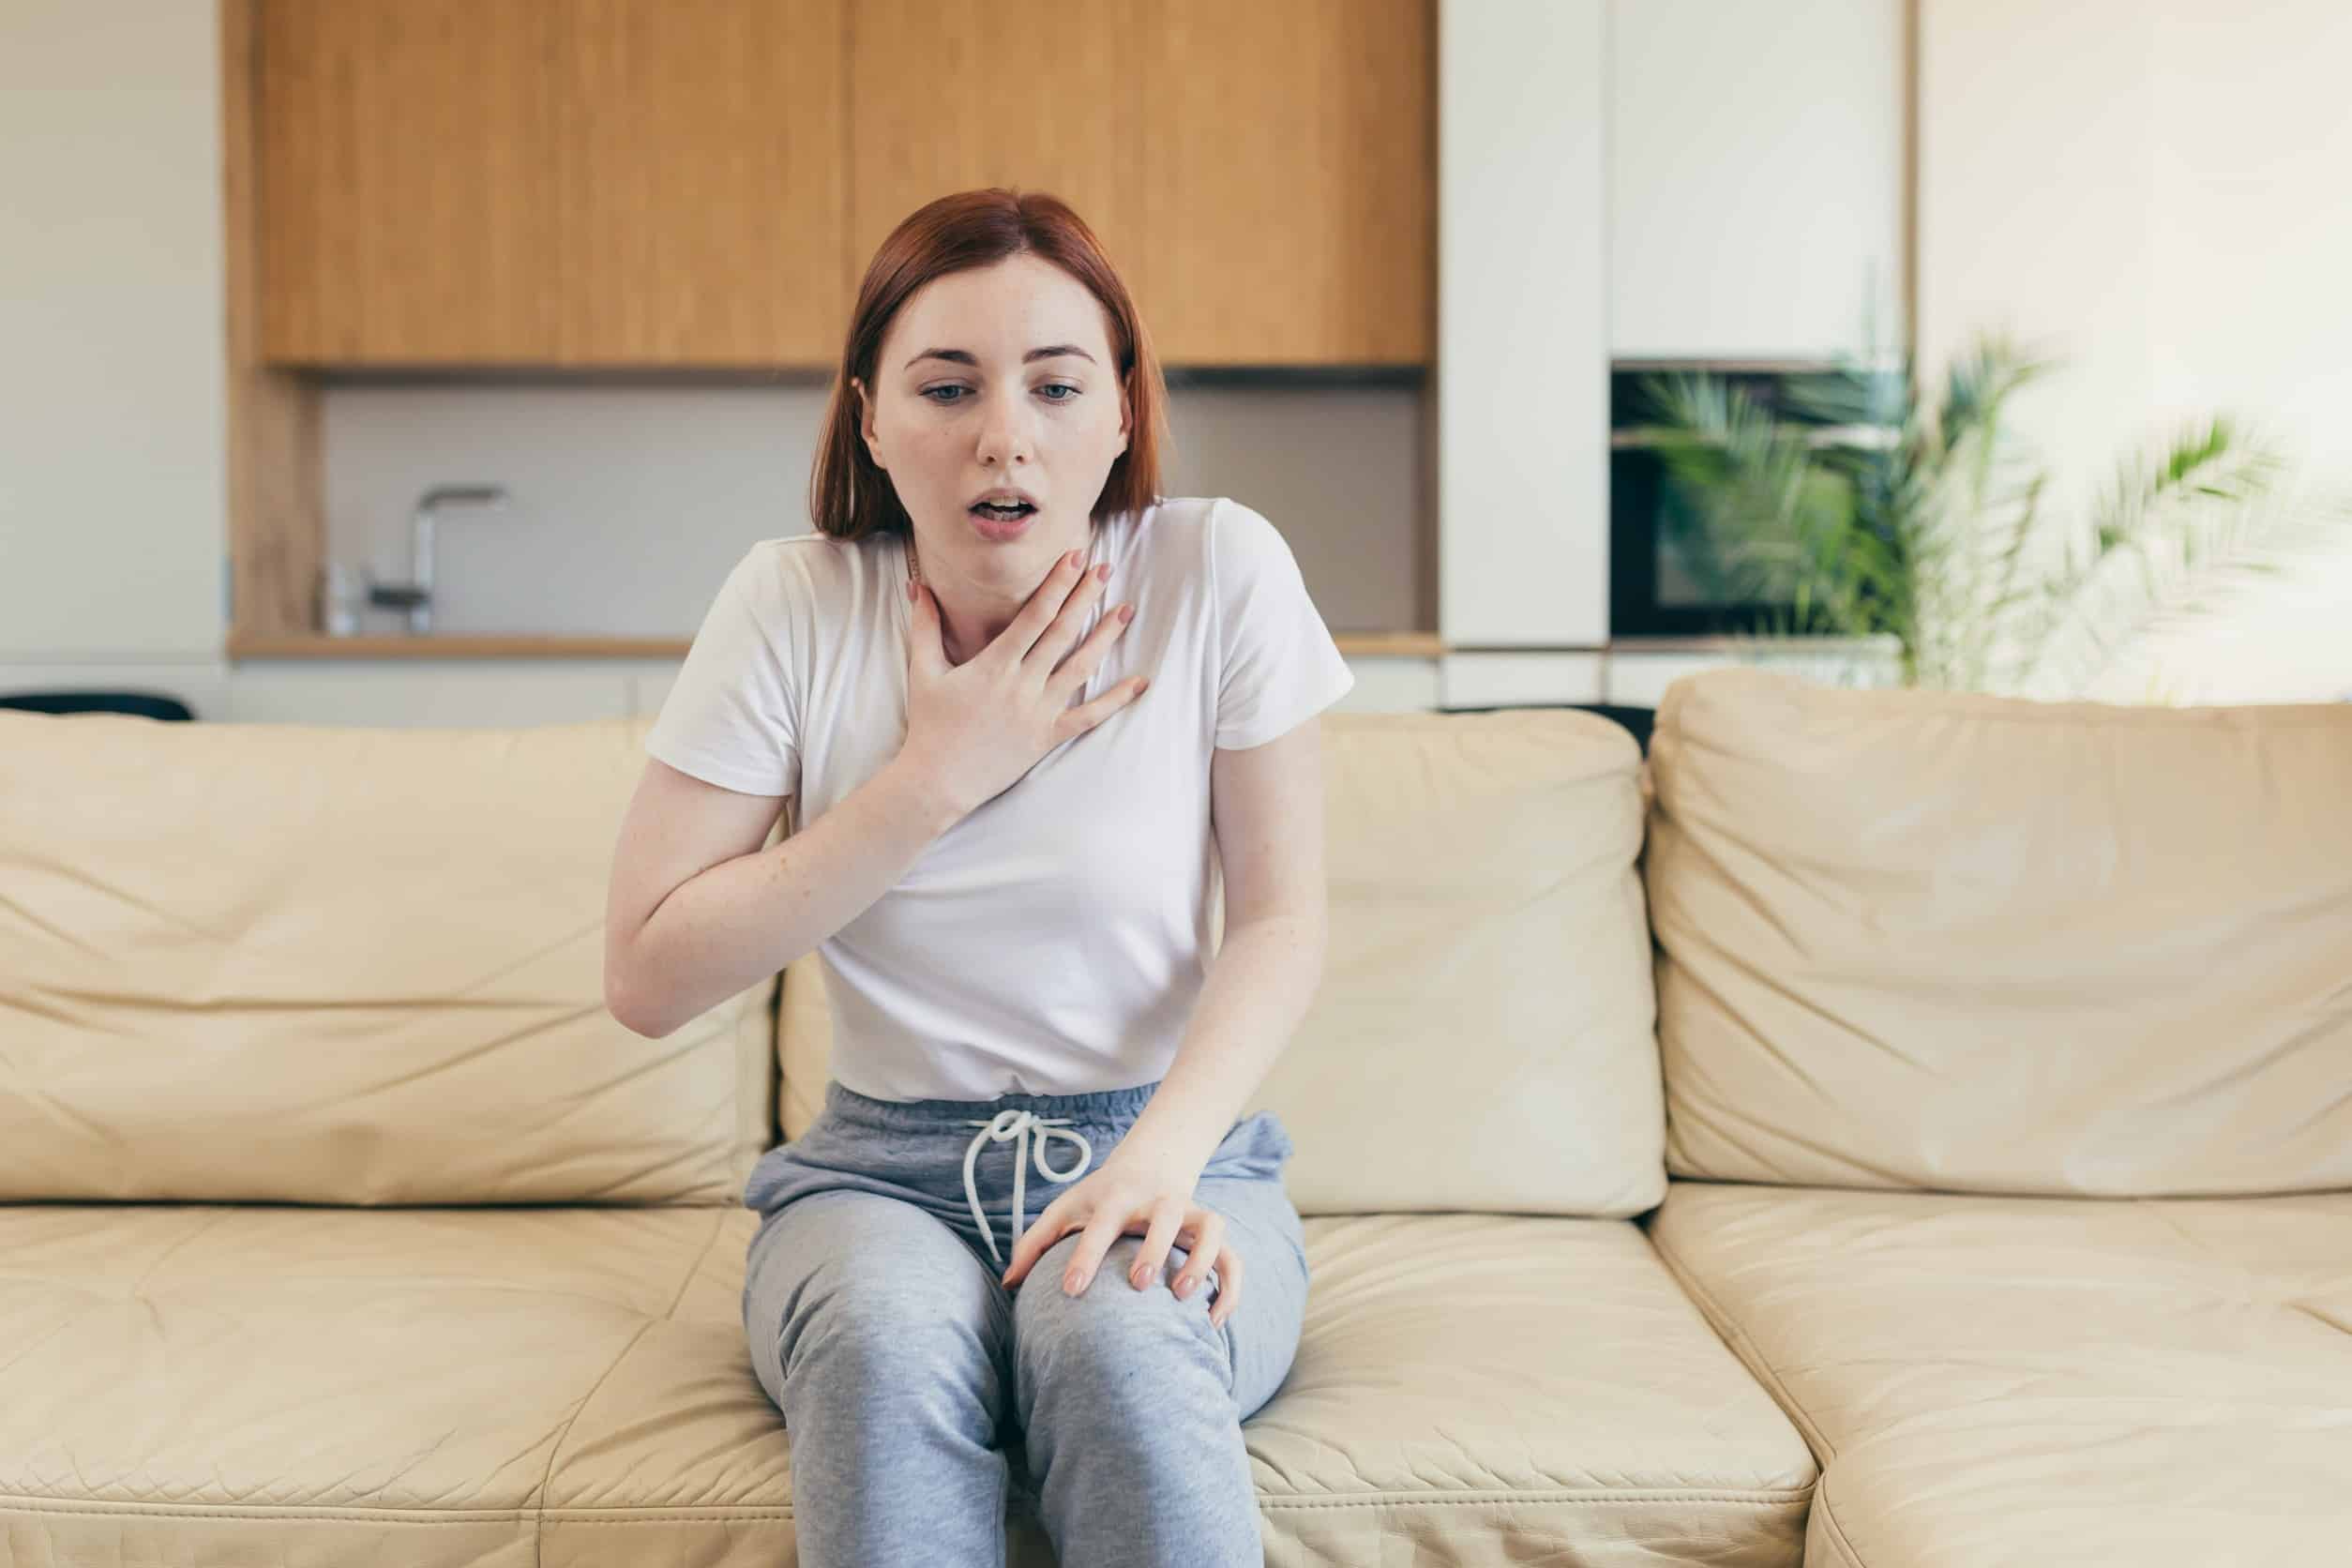 Girl on couch unable to breathe